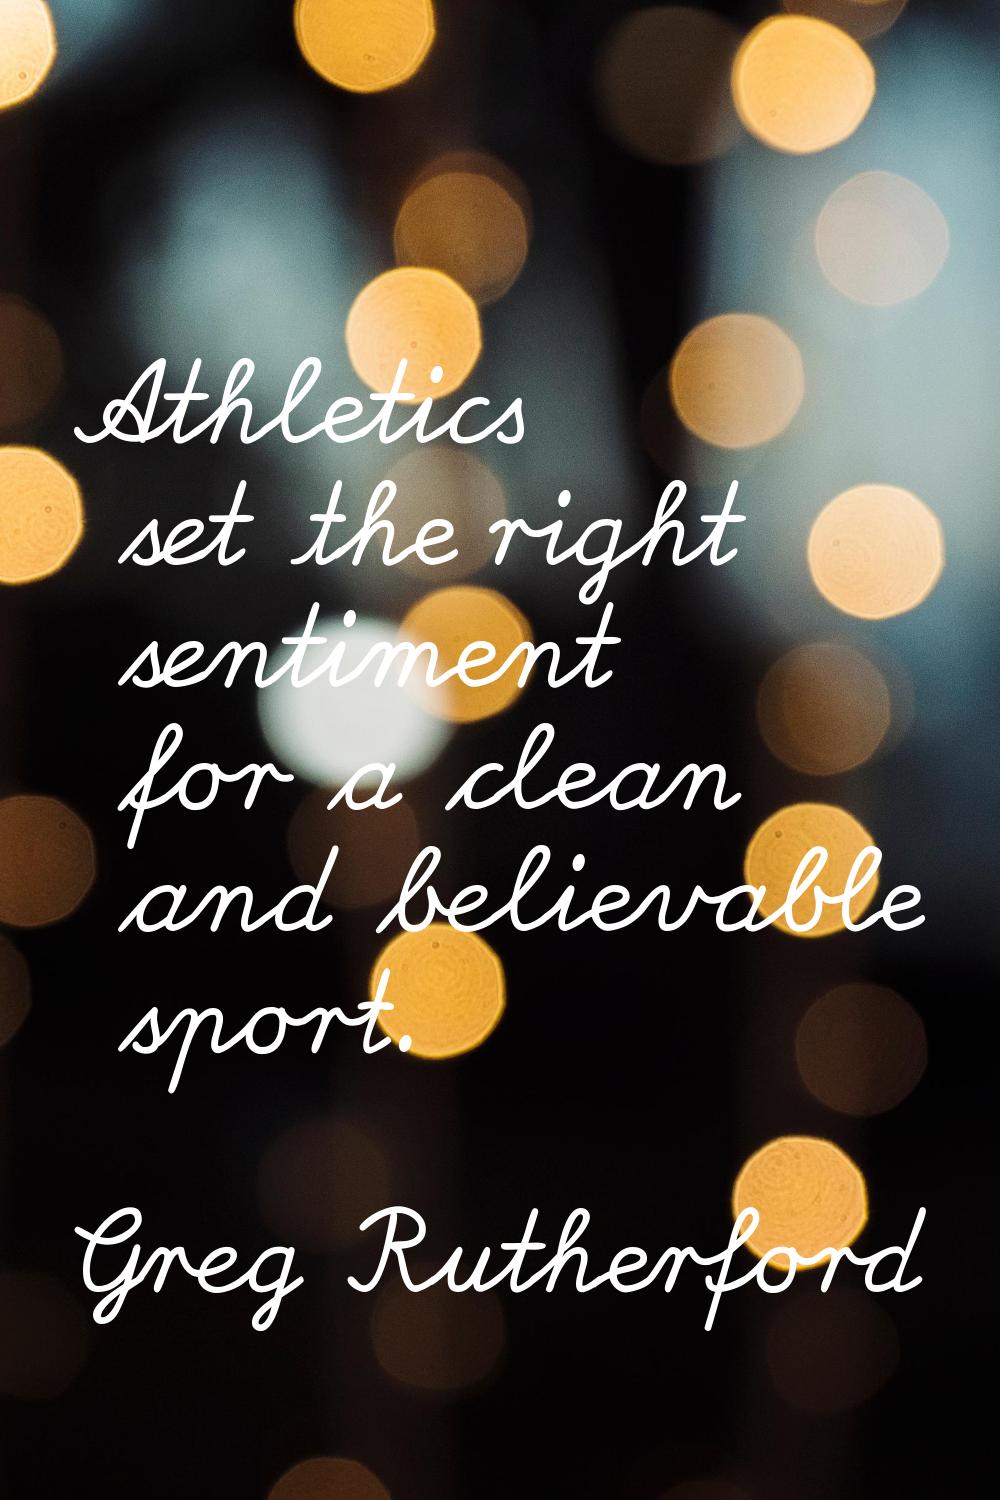 Athletics set the right sentiment for a clean and believable sport.